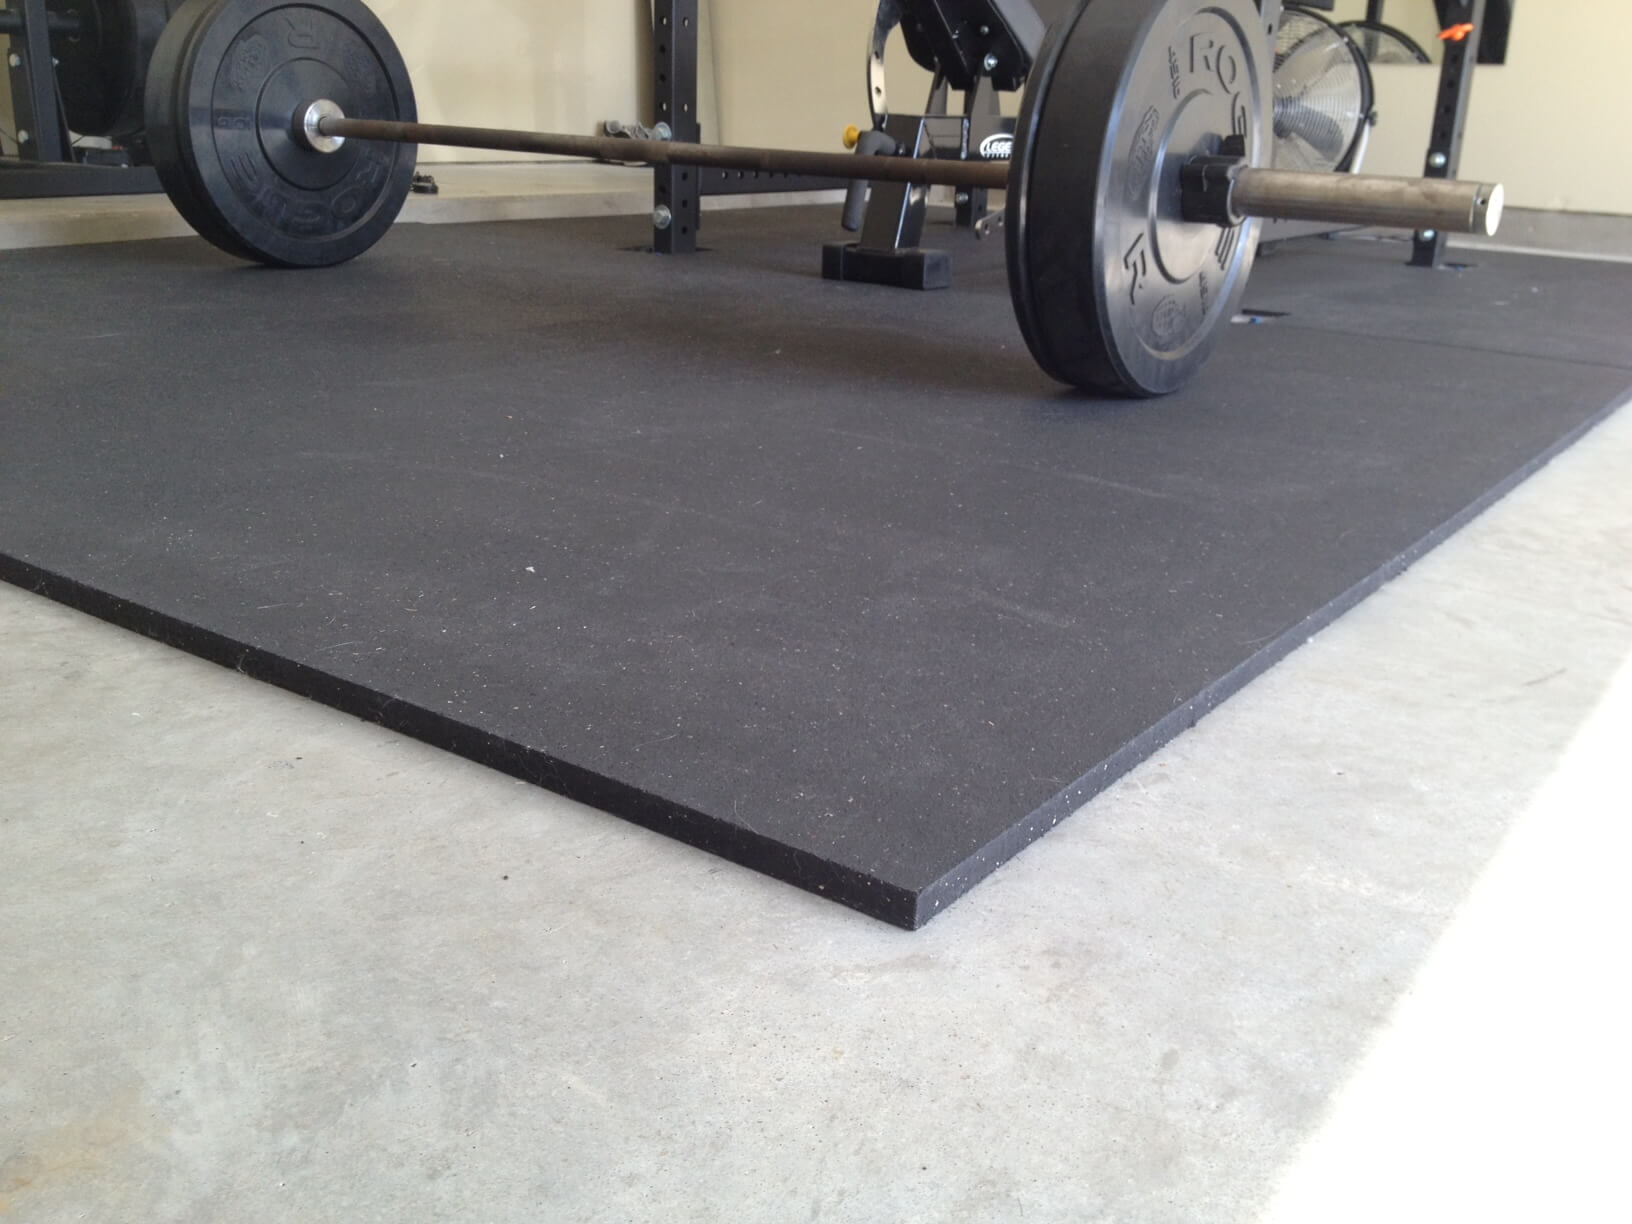 Aging Resistance Rubber Gym Flooring